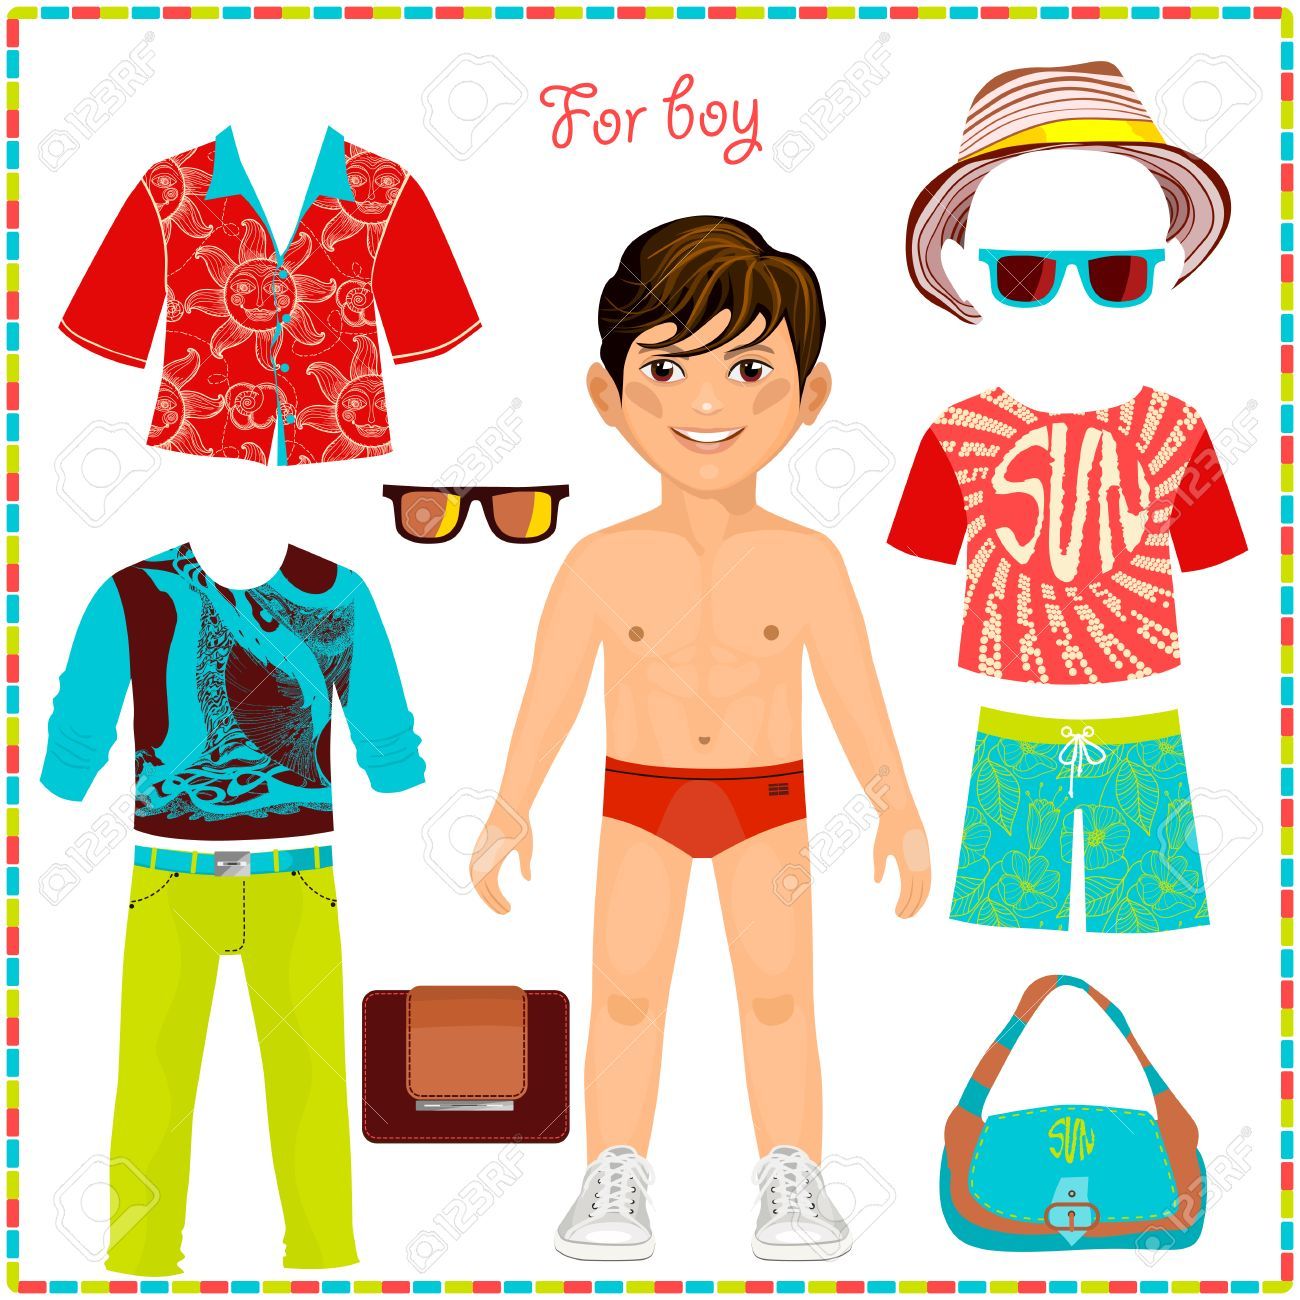 51298158-paper-doll-with-a-set-of-fashionable-clothing-cute-trendy-boy-template-for-cutting-summer-collection-Stock-Vector.jpg